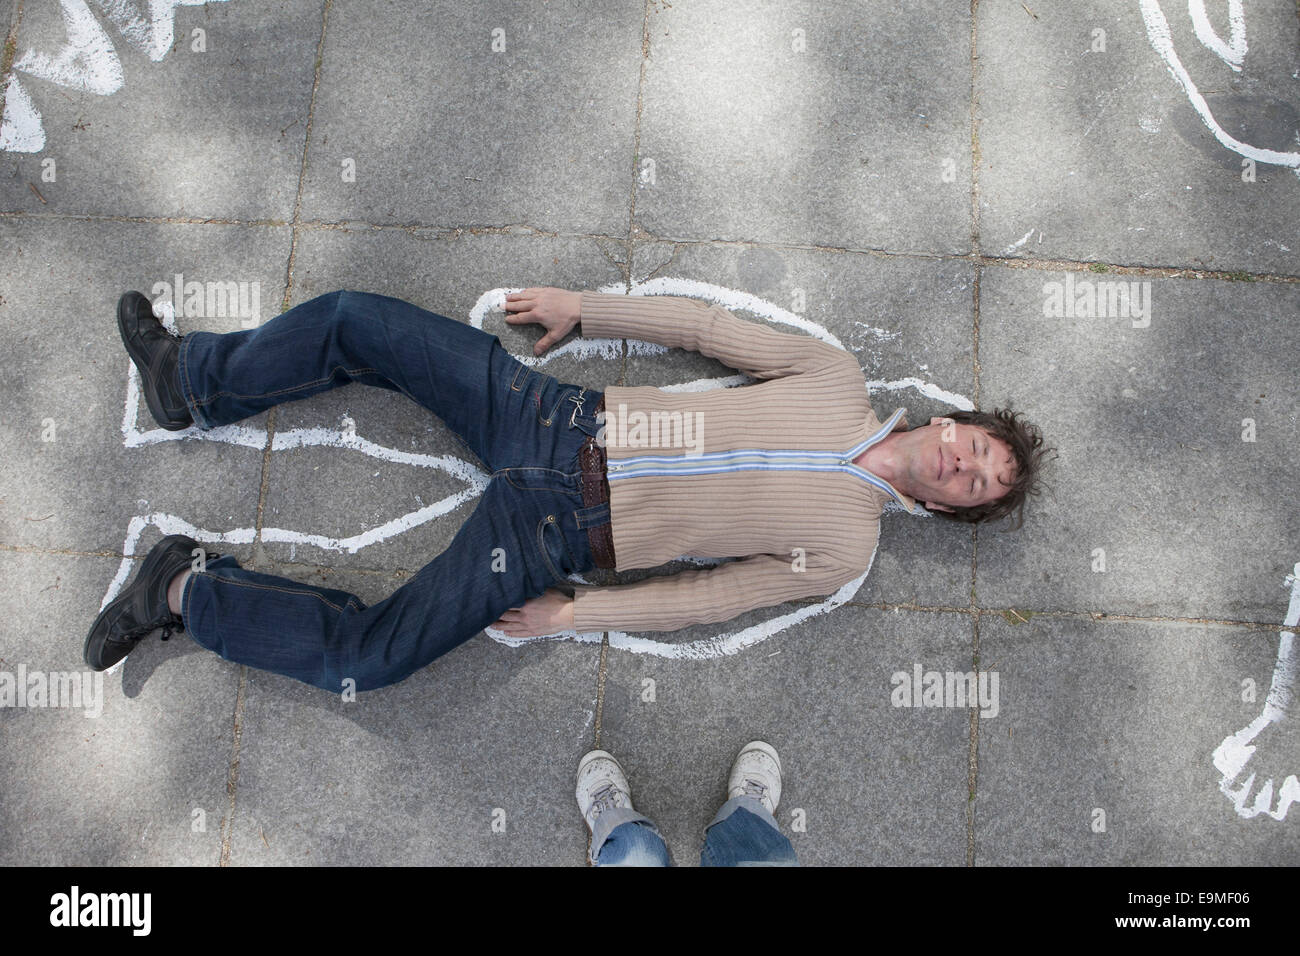 High angle view of chalk outline around man lying on street Stock Photo